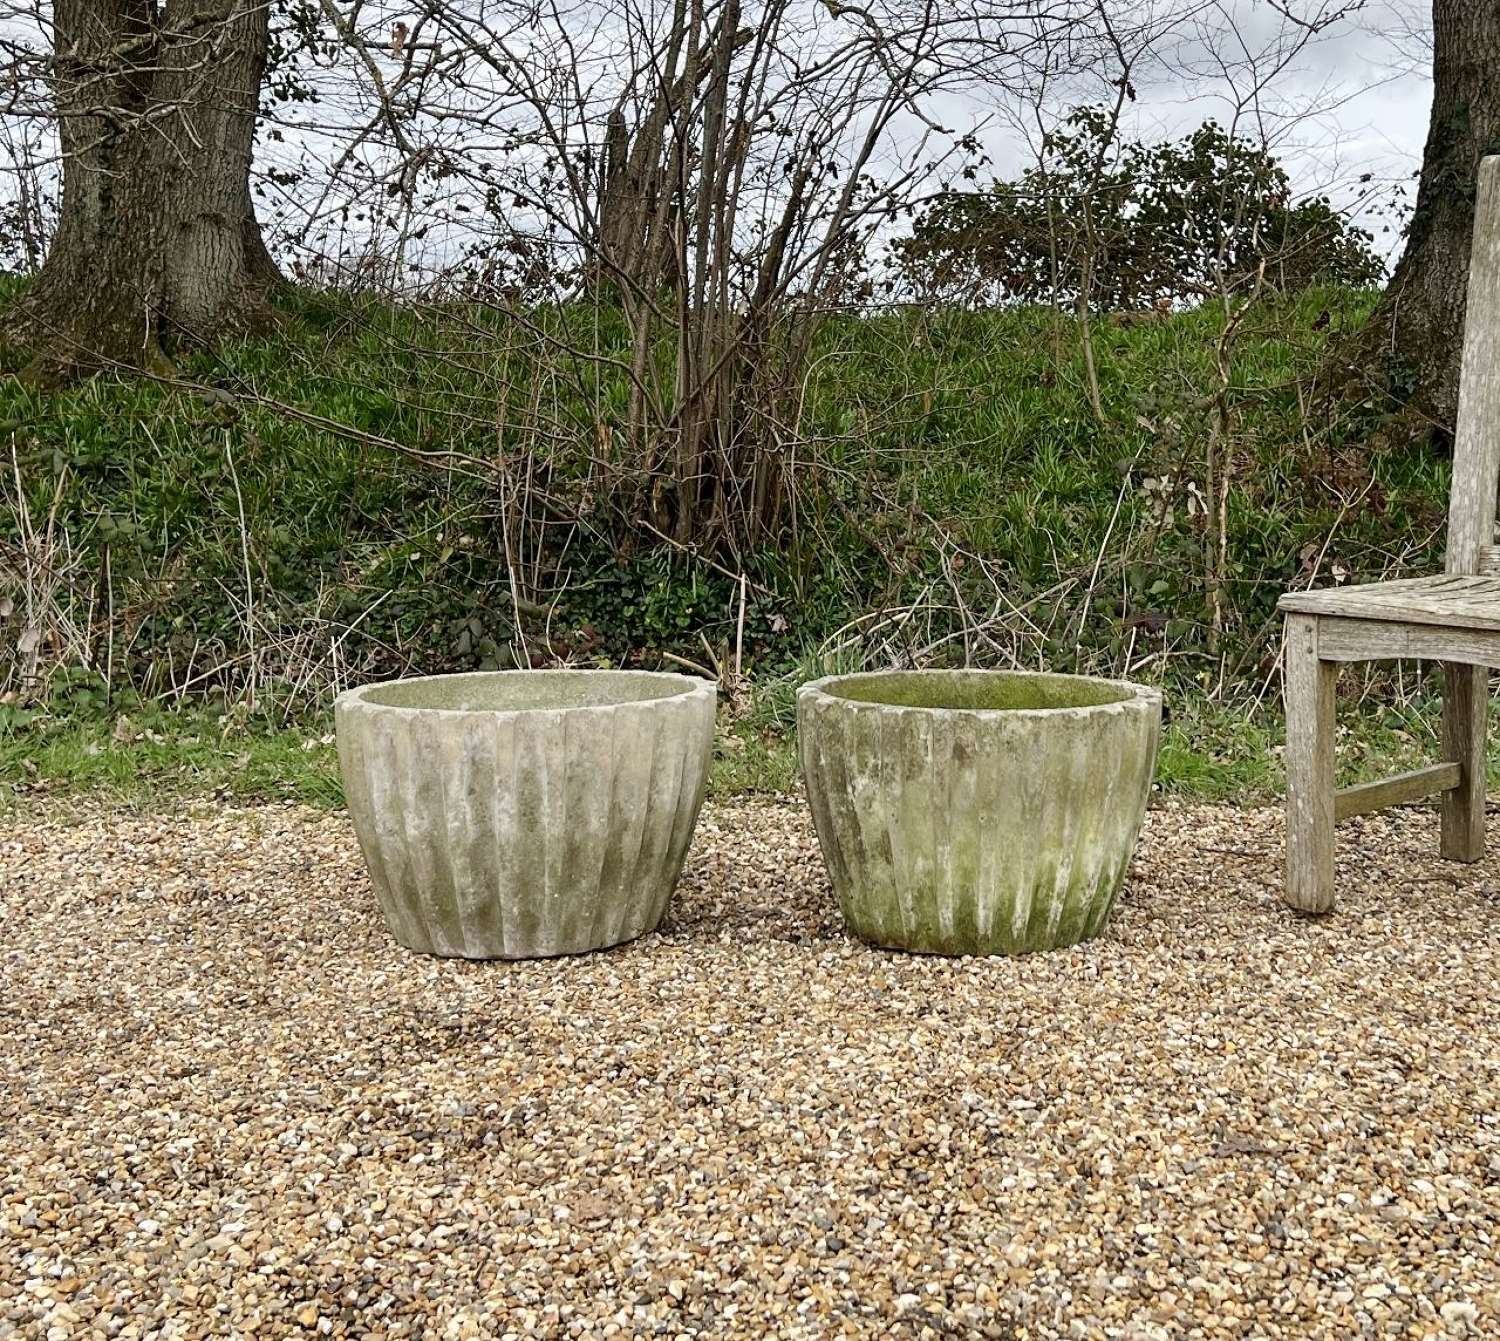 Pair of Fluted Planters